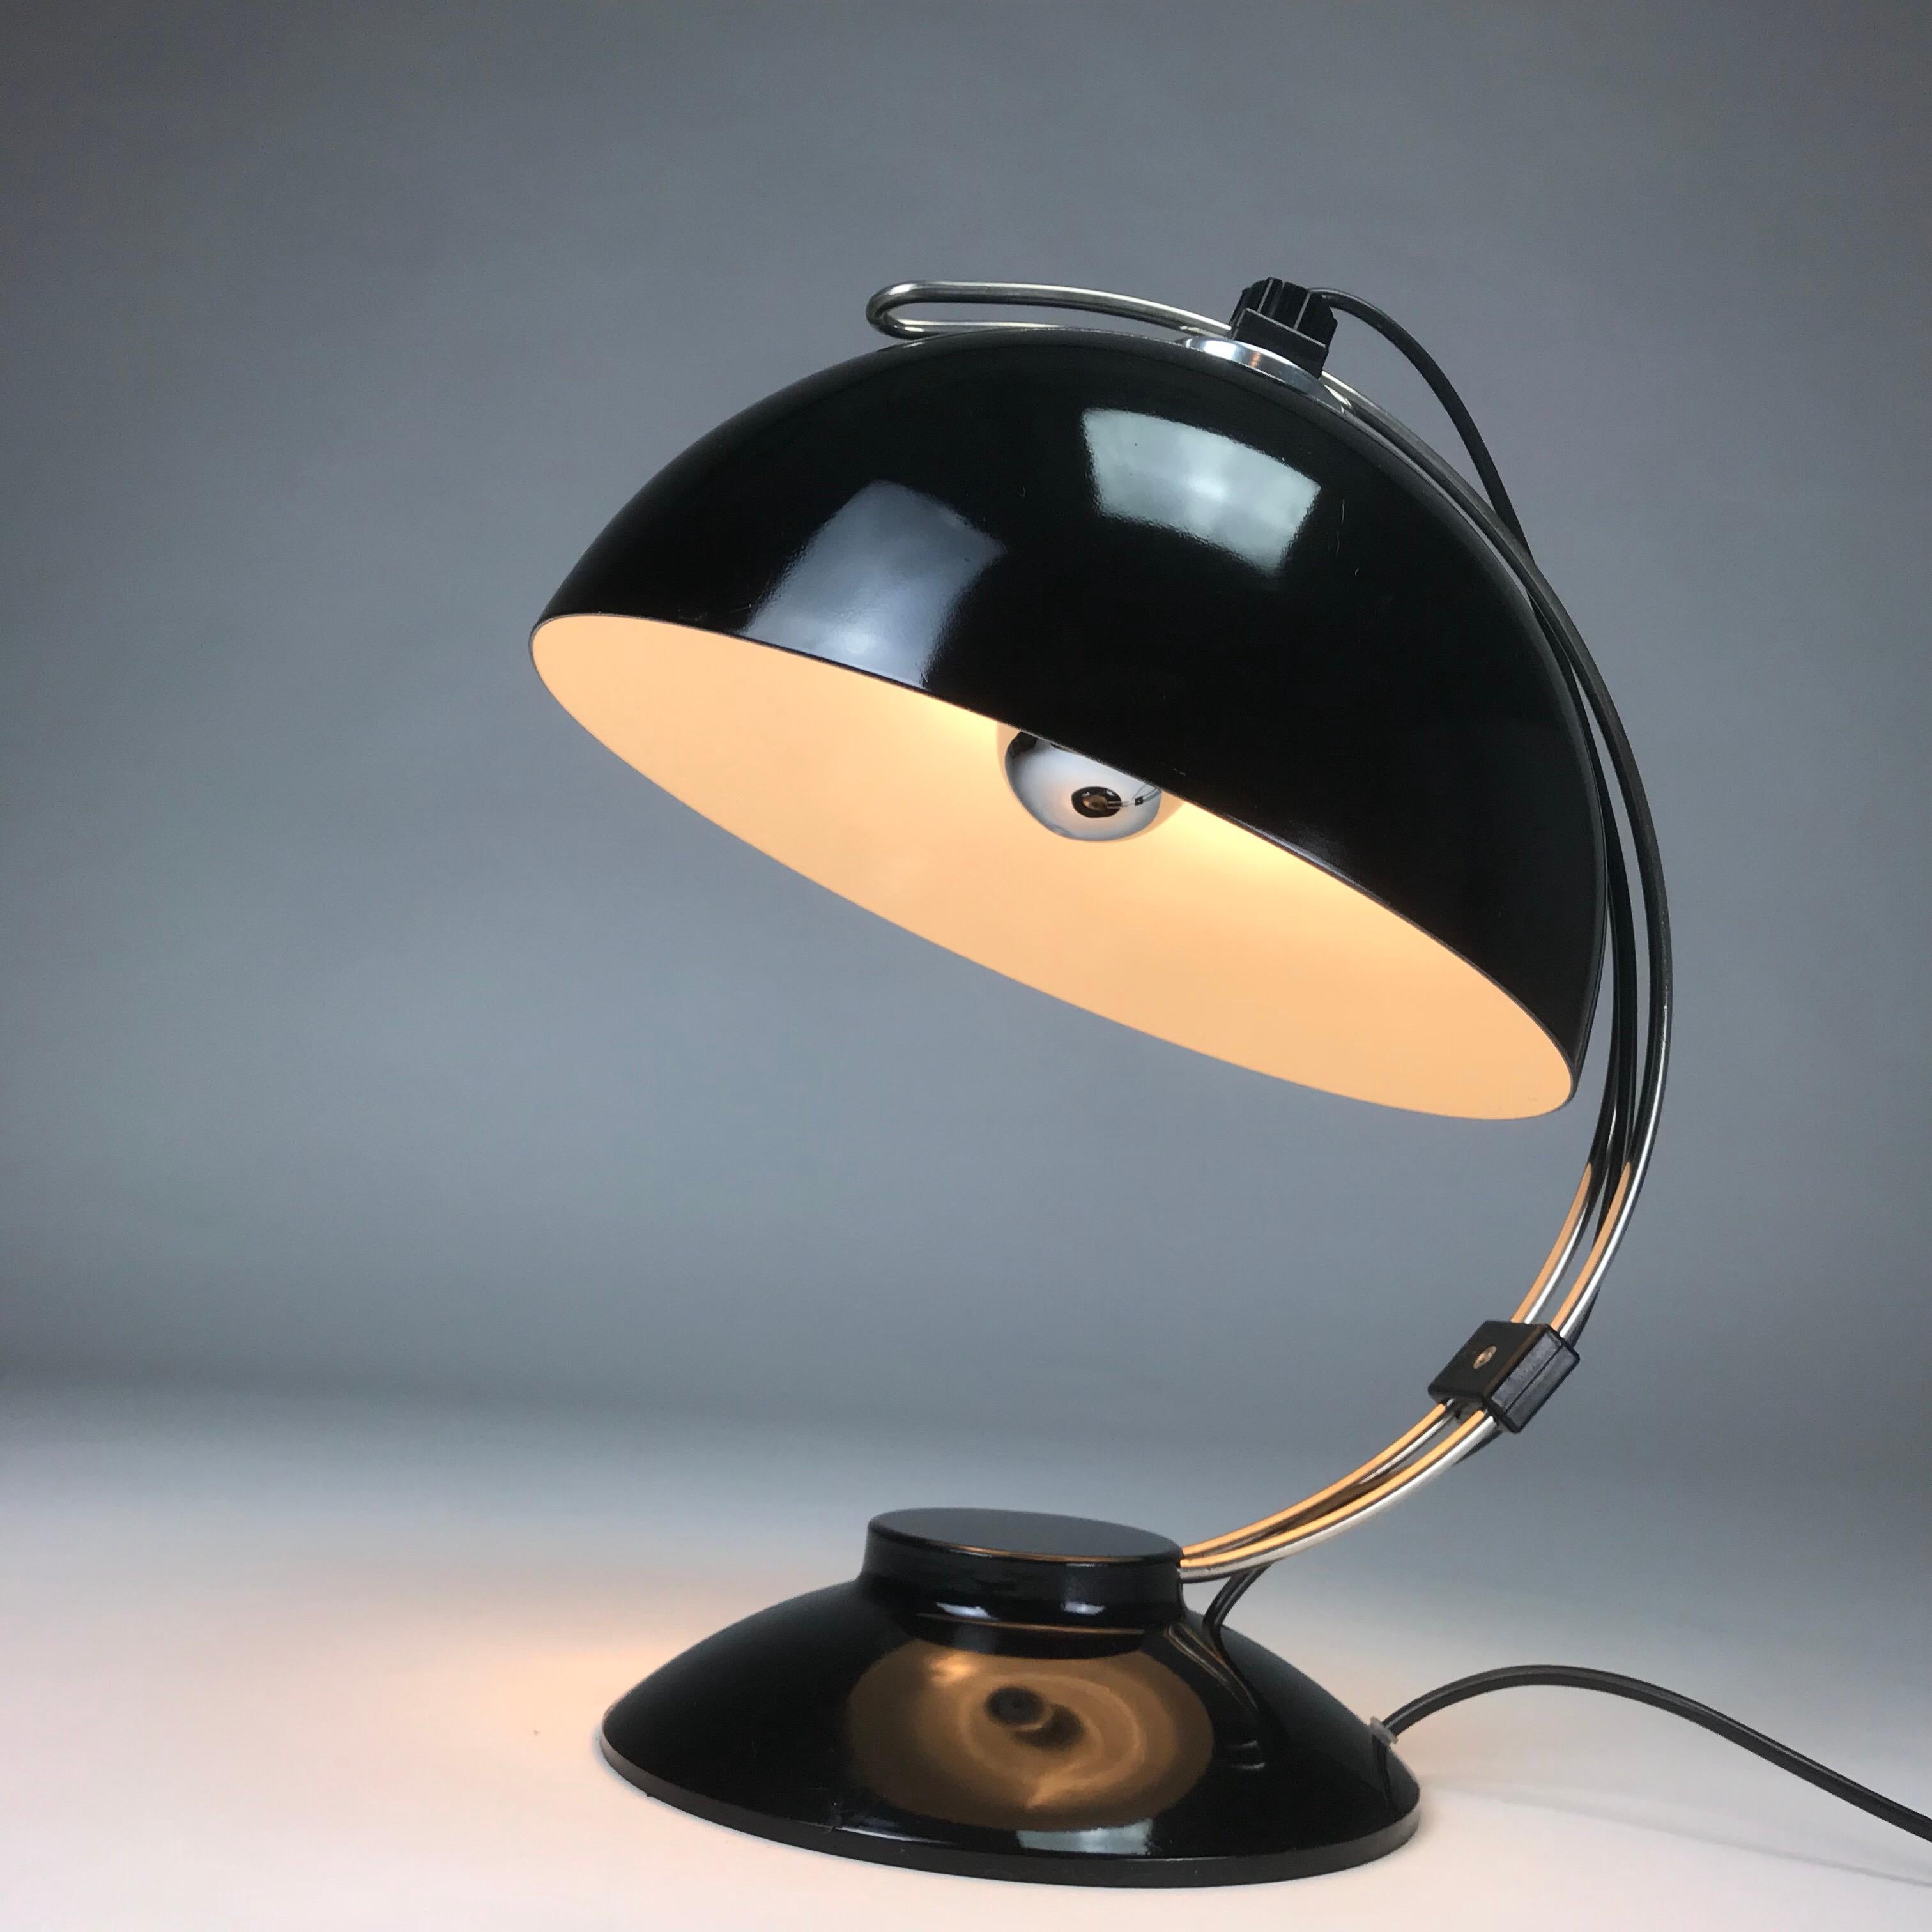 Mid-20th Century Black Glossy Industrial Desk Lamp from the 1950s